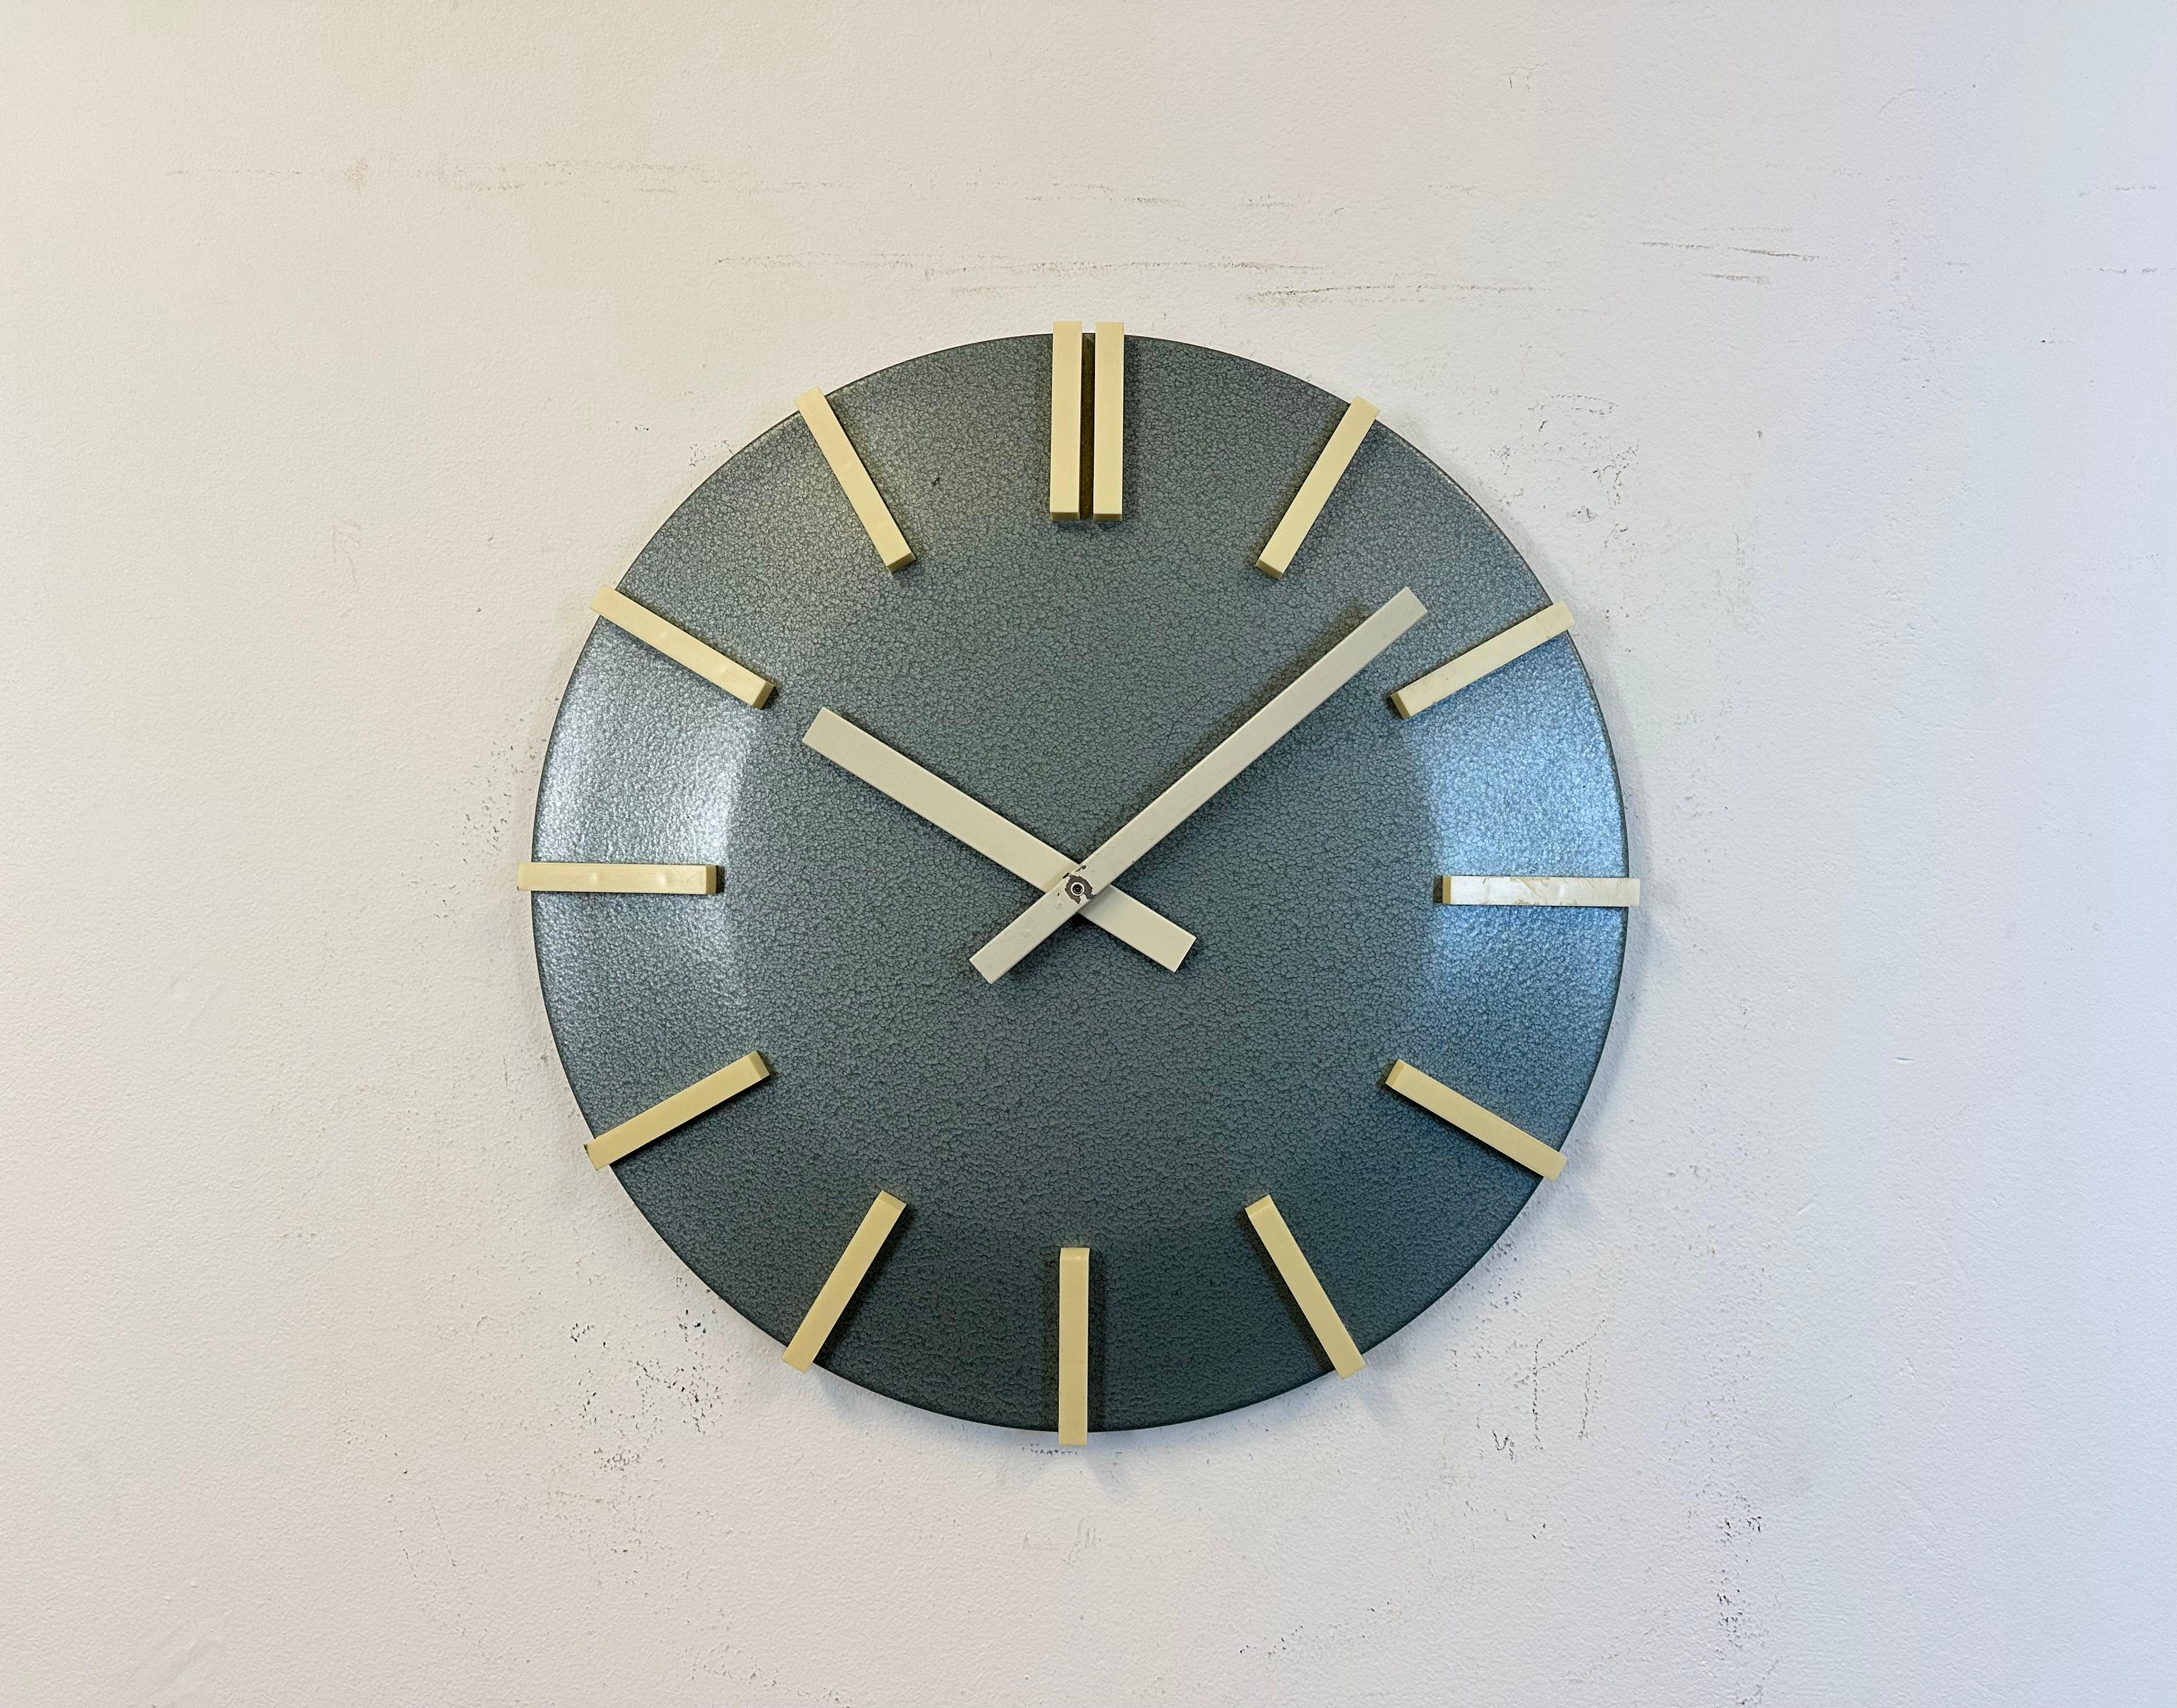 Industrial blue grey hammerpaint office wall clock was produced by Pragotron during the 1970s in former Czechoslovakia. Clock face with white plastic numerals is made from metal. Diameter is 40 cm. The piece has been converted into a battery-powered